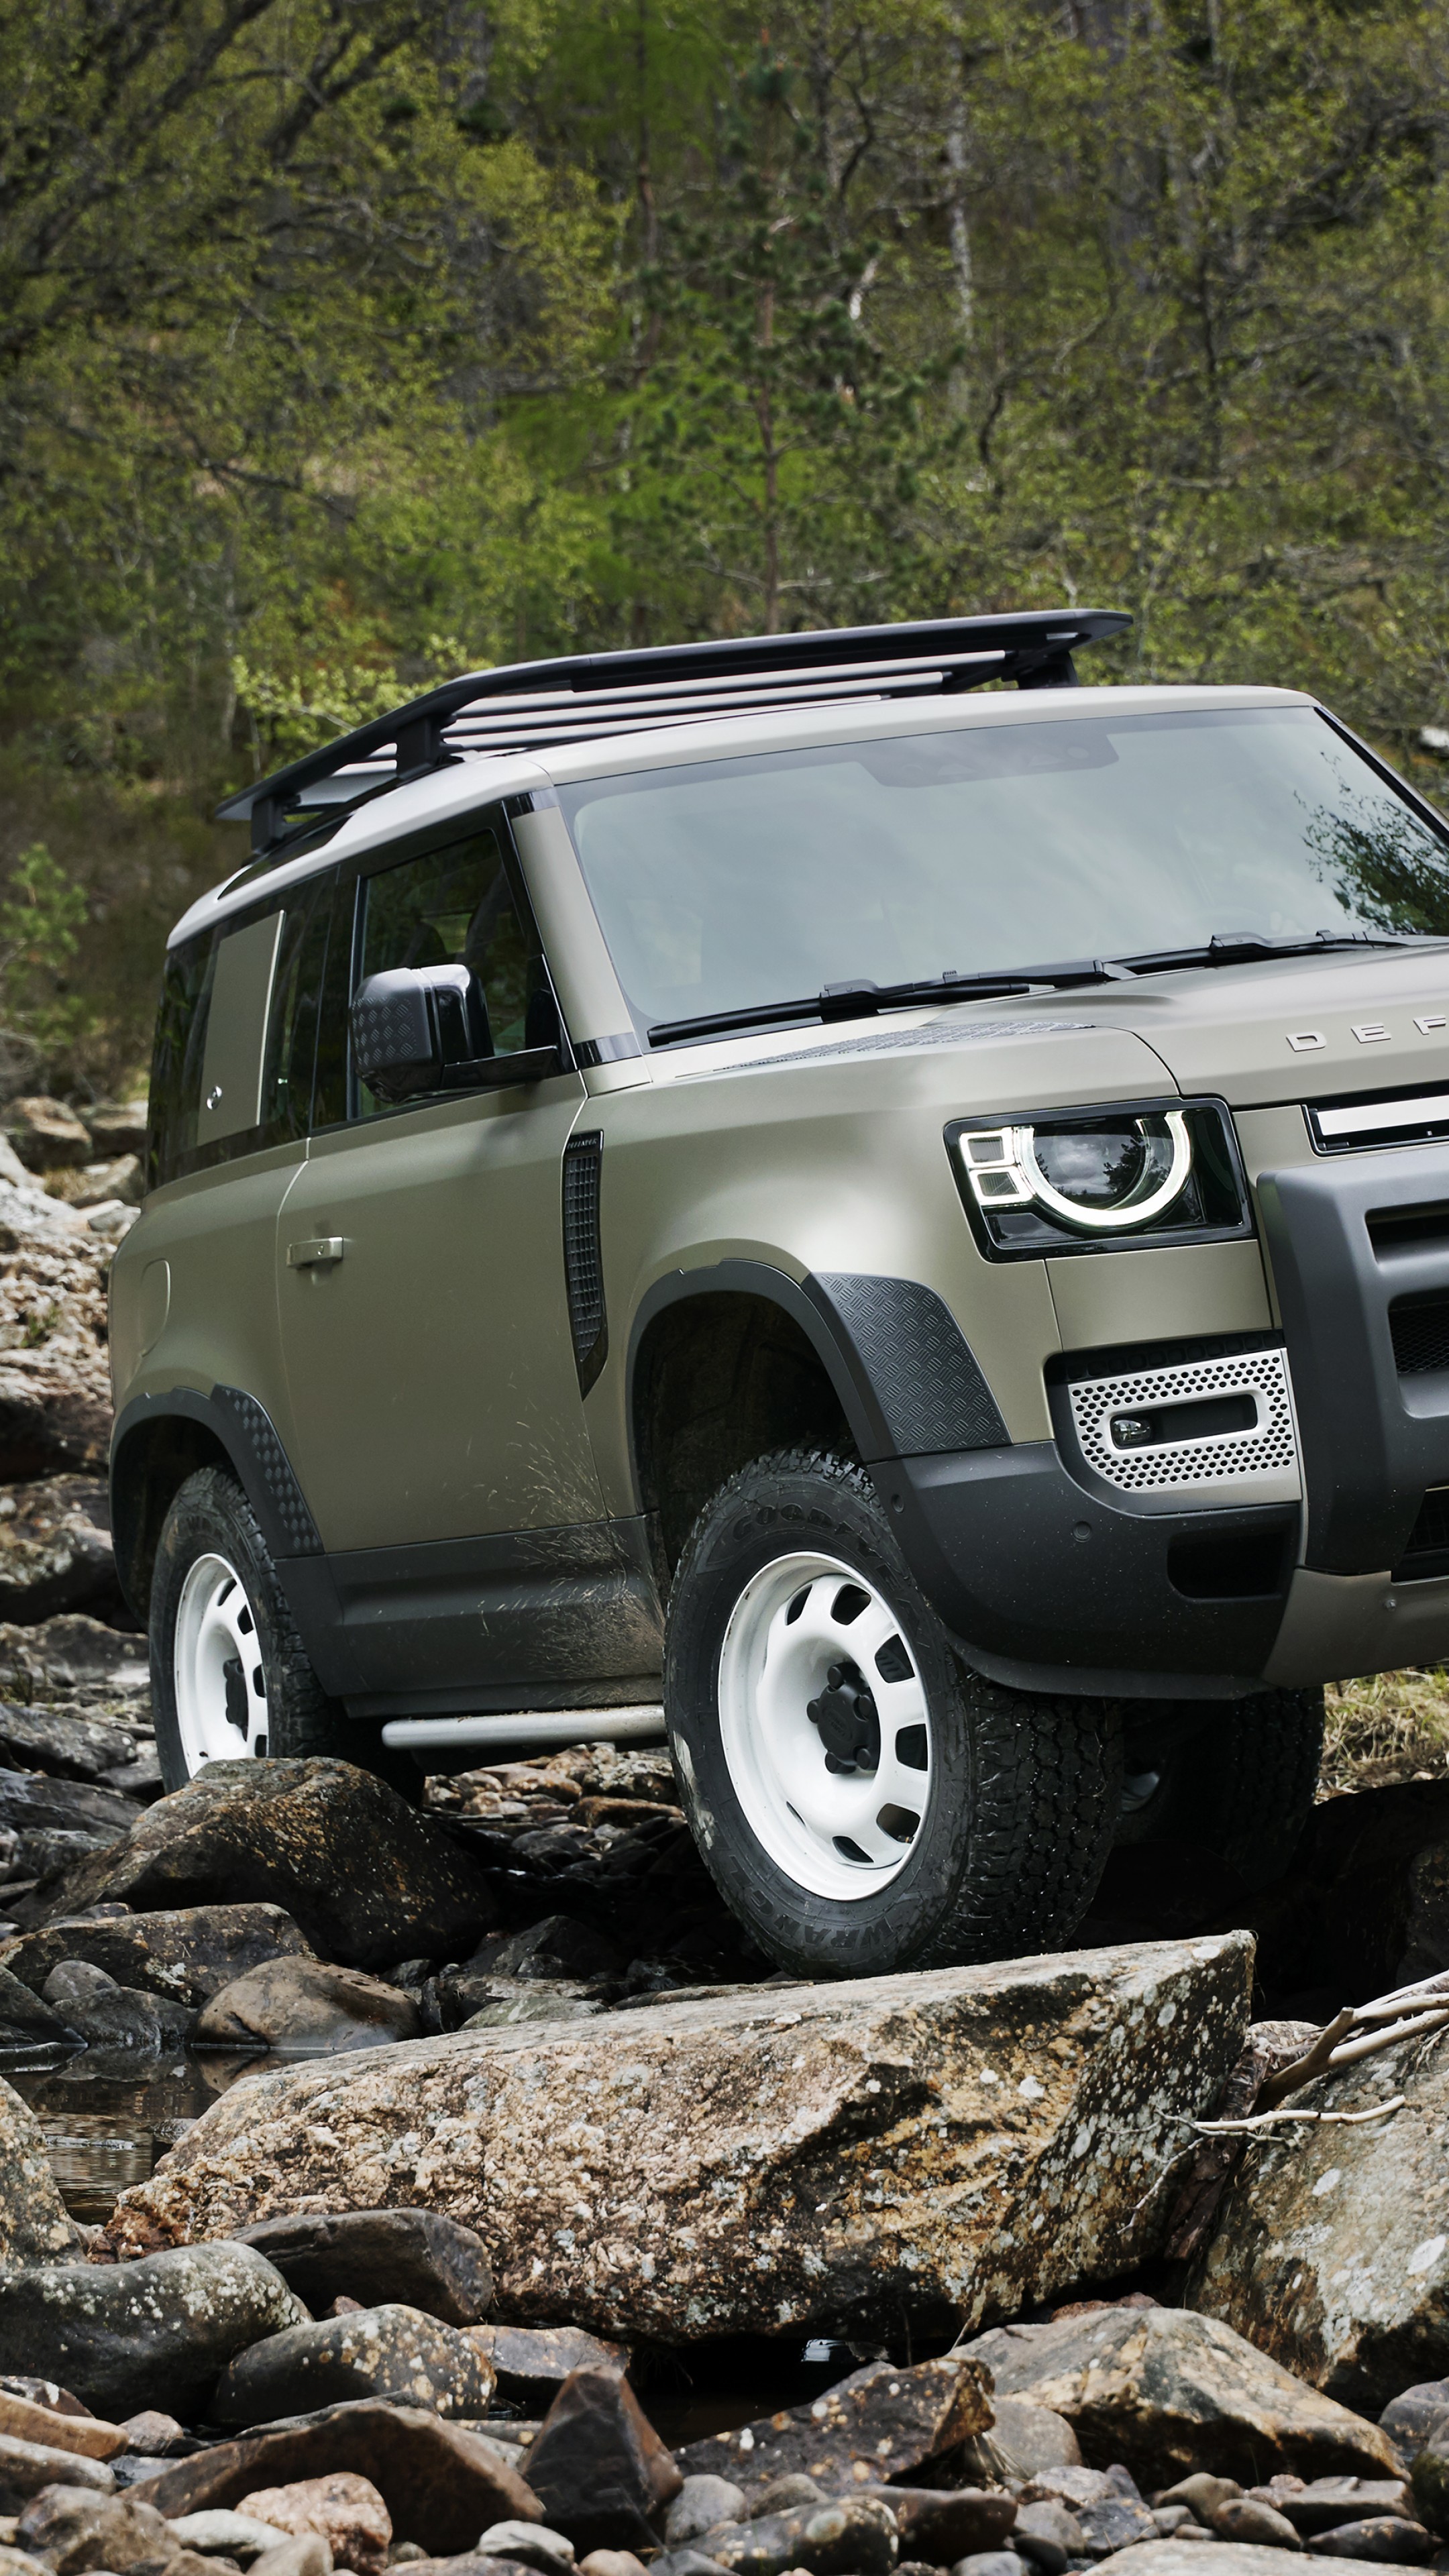 Land Rover Defender 110 hd specifications